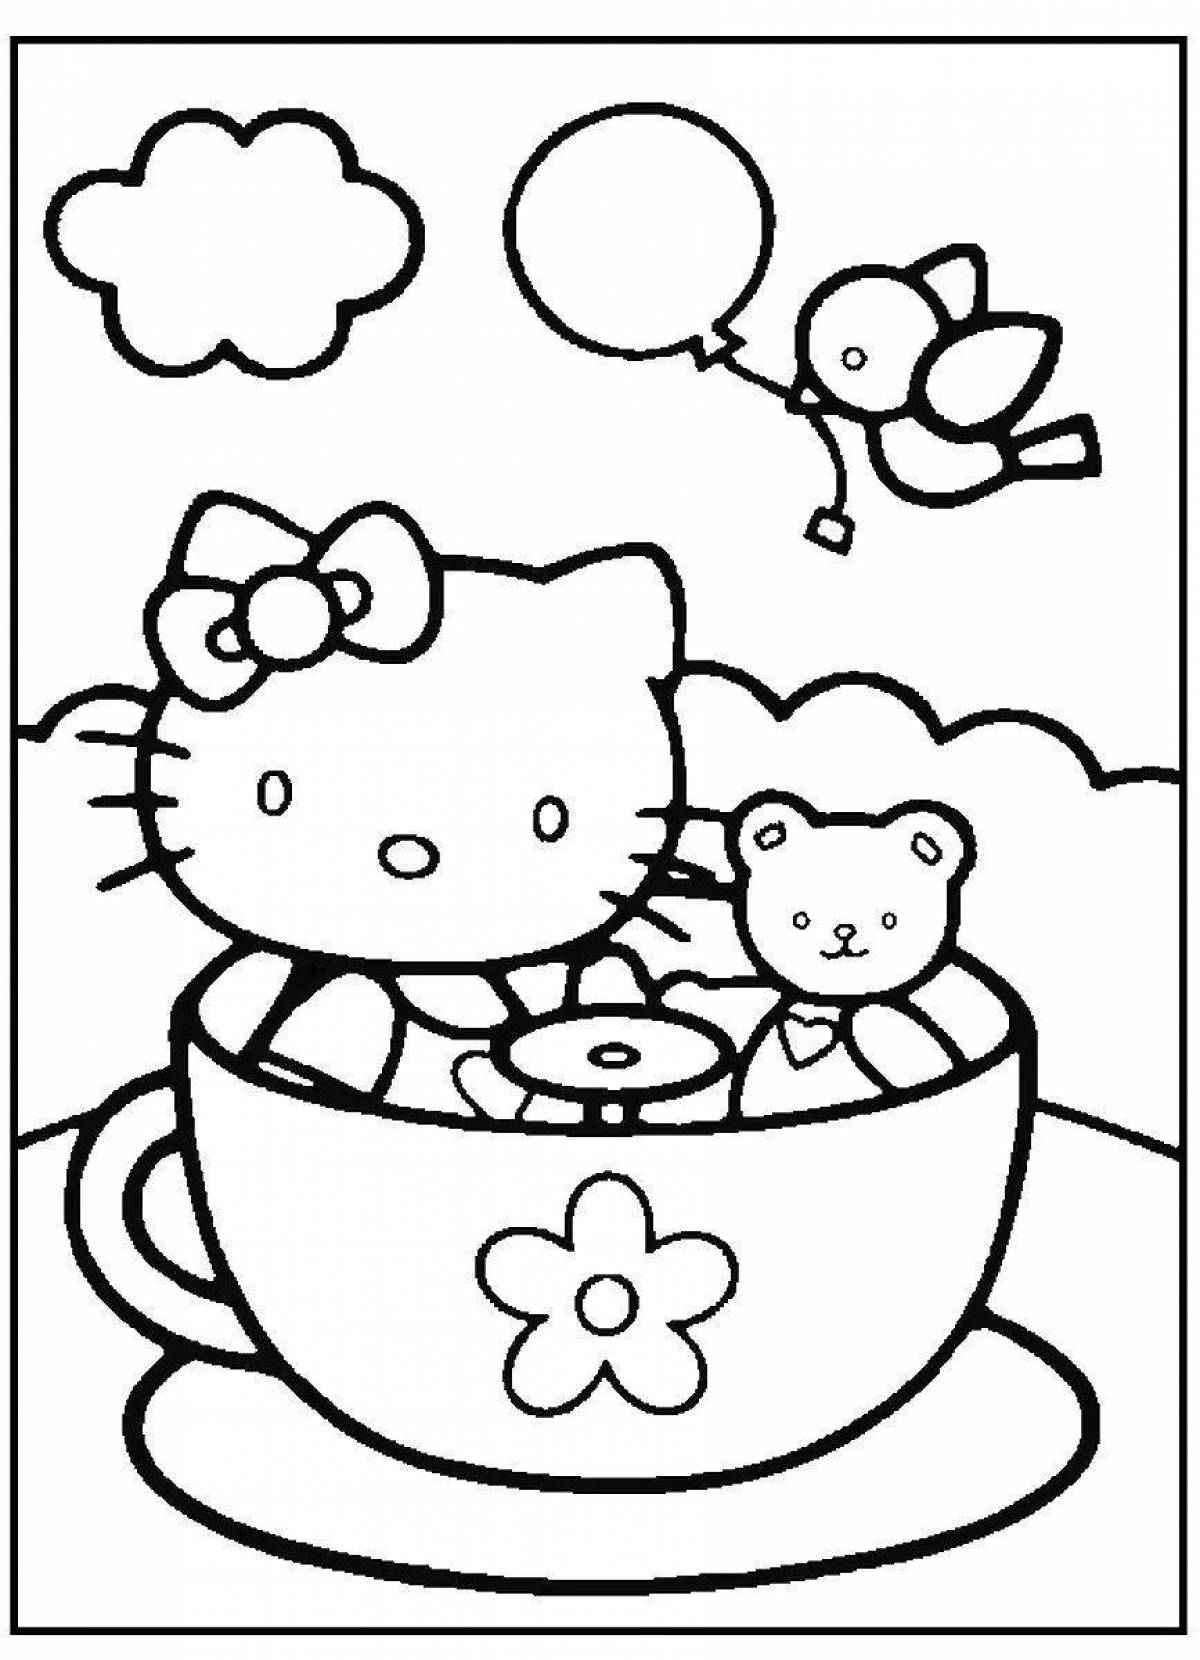 Coloring page mischievous cat in a cup